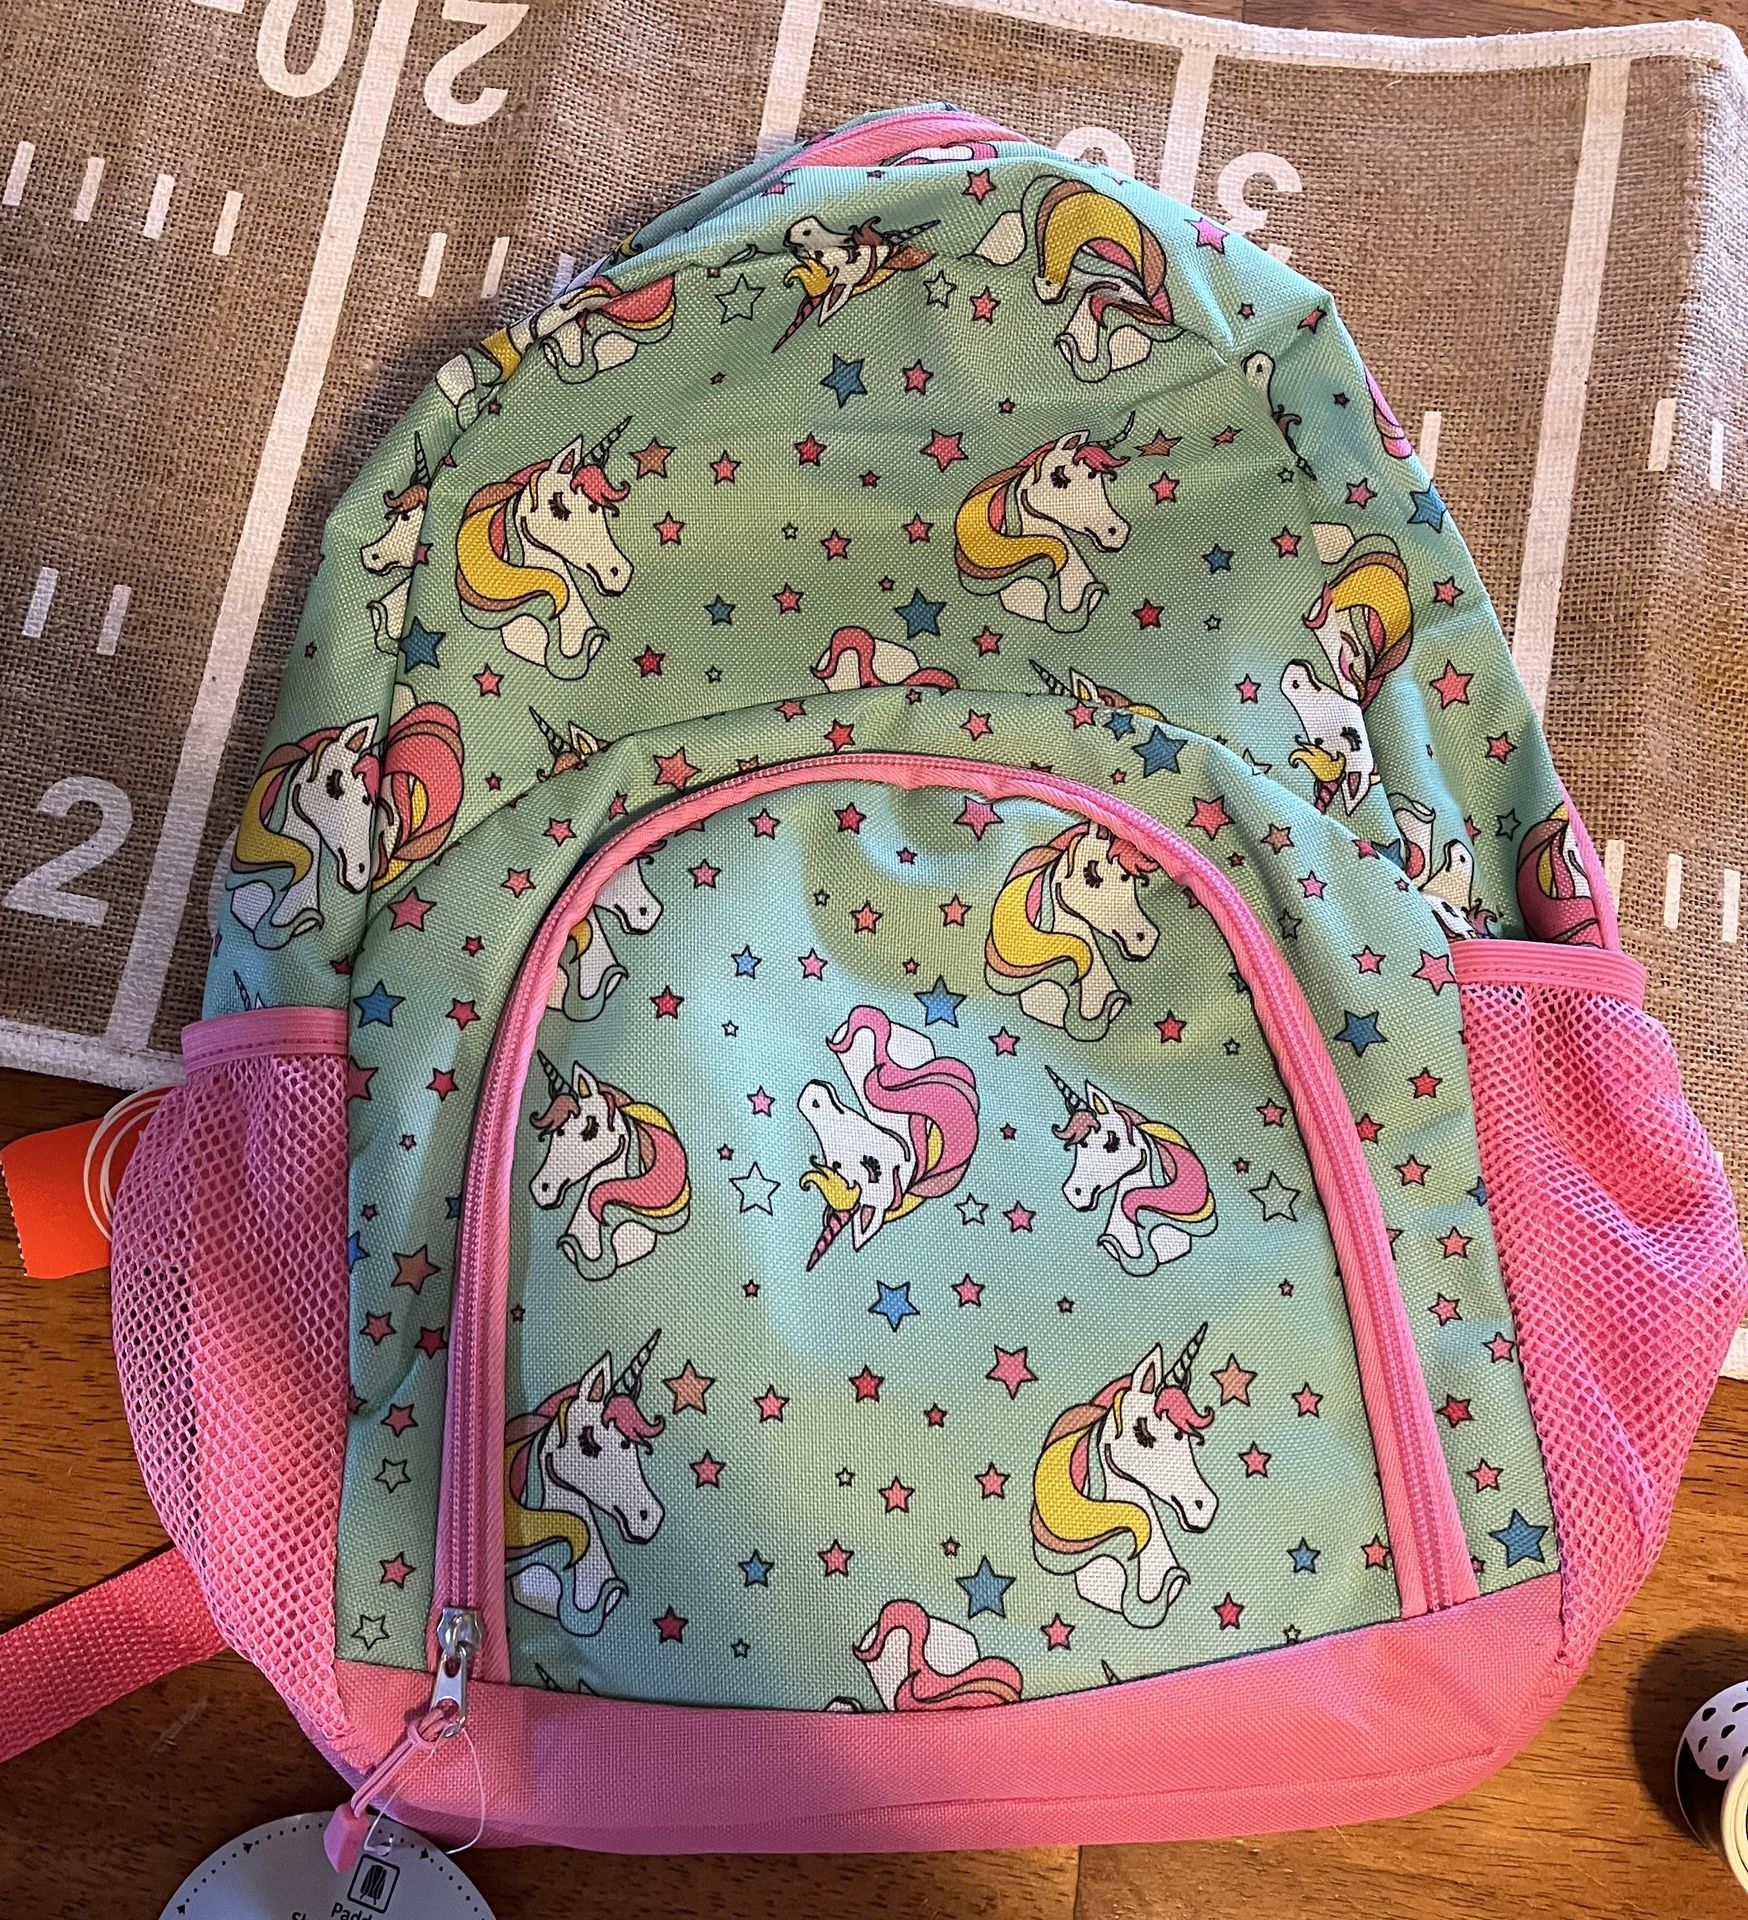 Unicorn Backpack and Supplies 8pcs